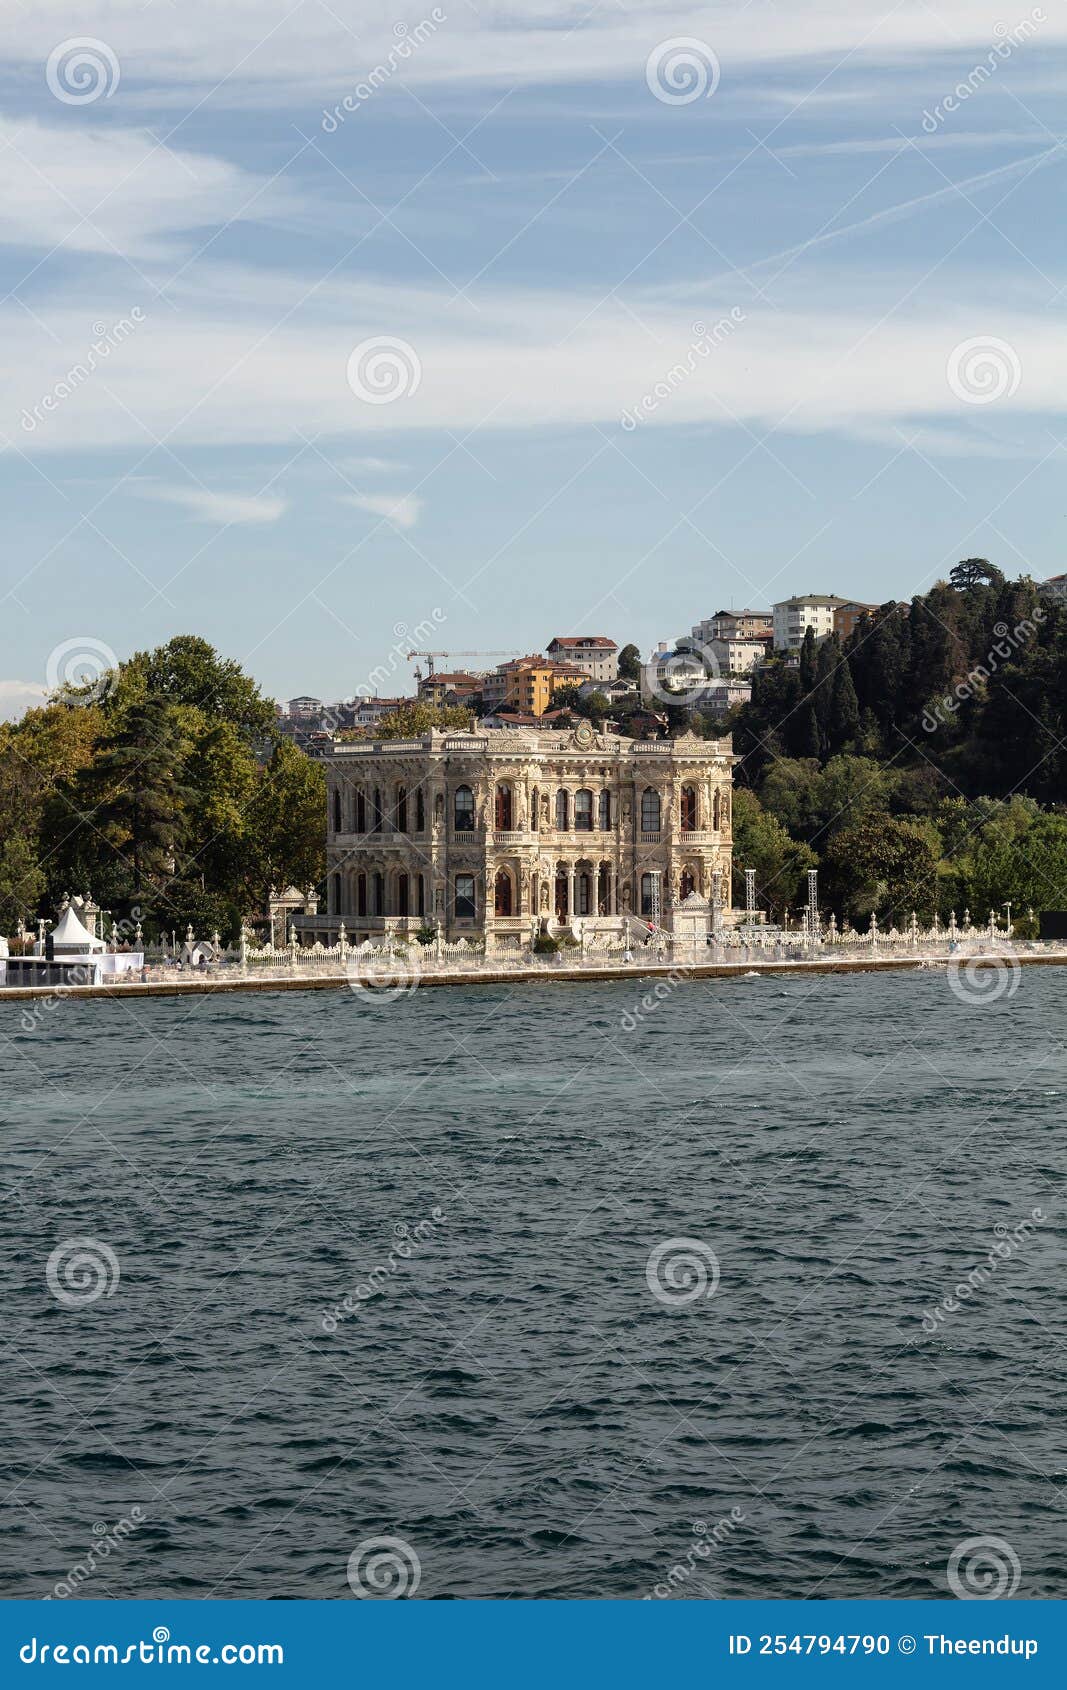 view of historical mansion by bosphorus called kucuk su kasri in kandilli area of asian side of istanbul.